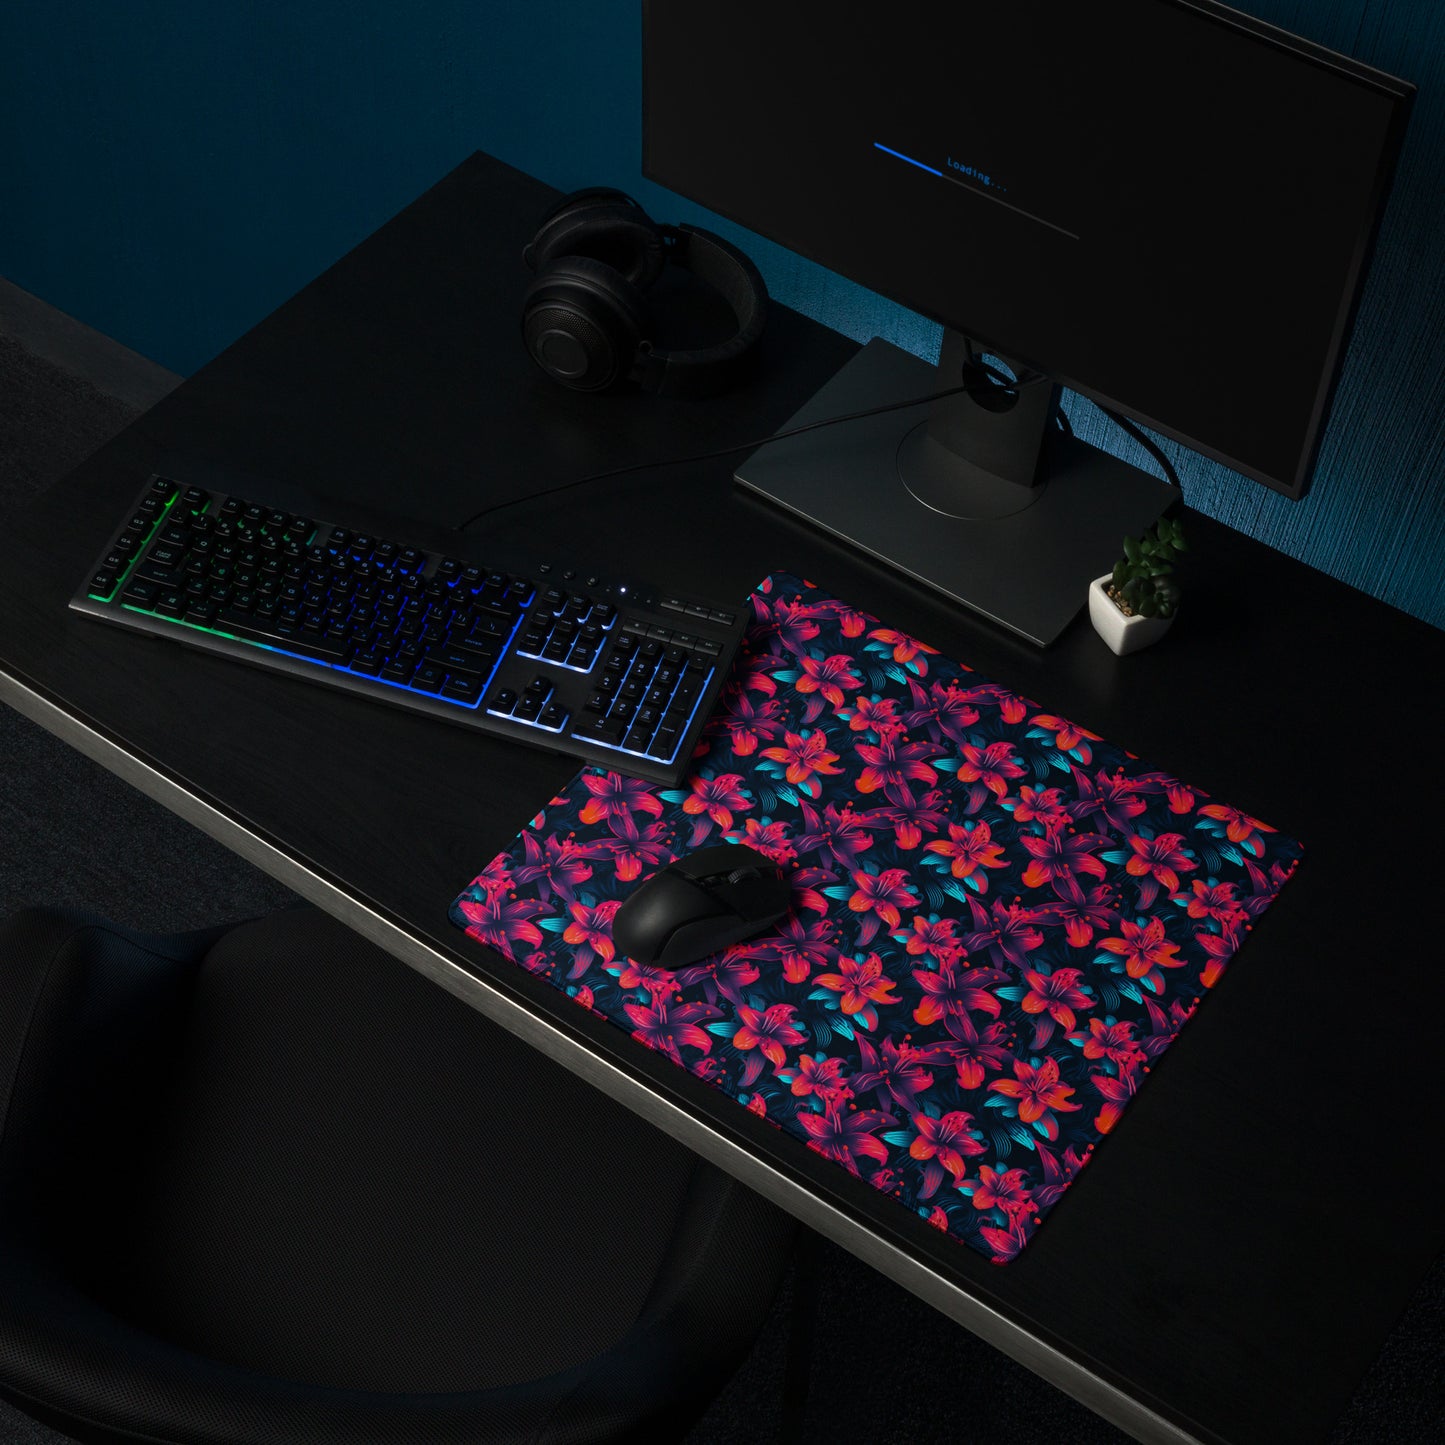 A 18" x 16" desk pad with a neon red and blue floral pattern sitting on a desk.